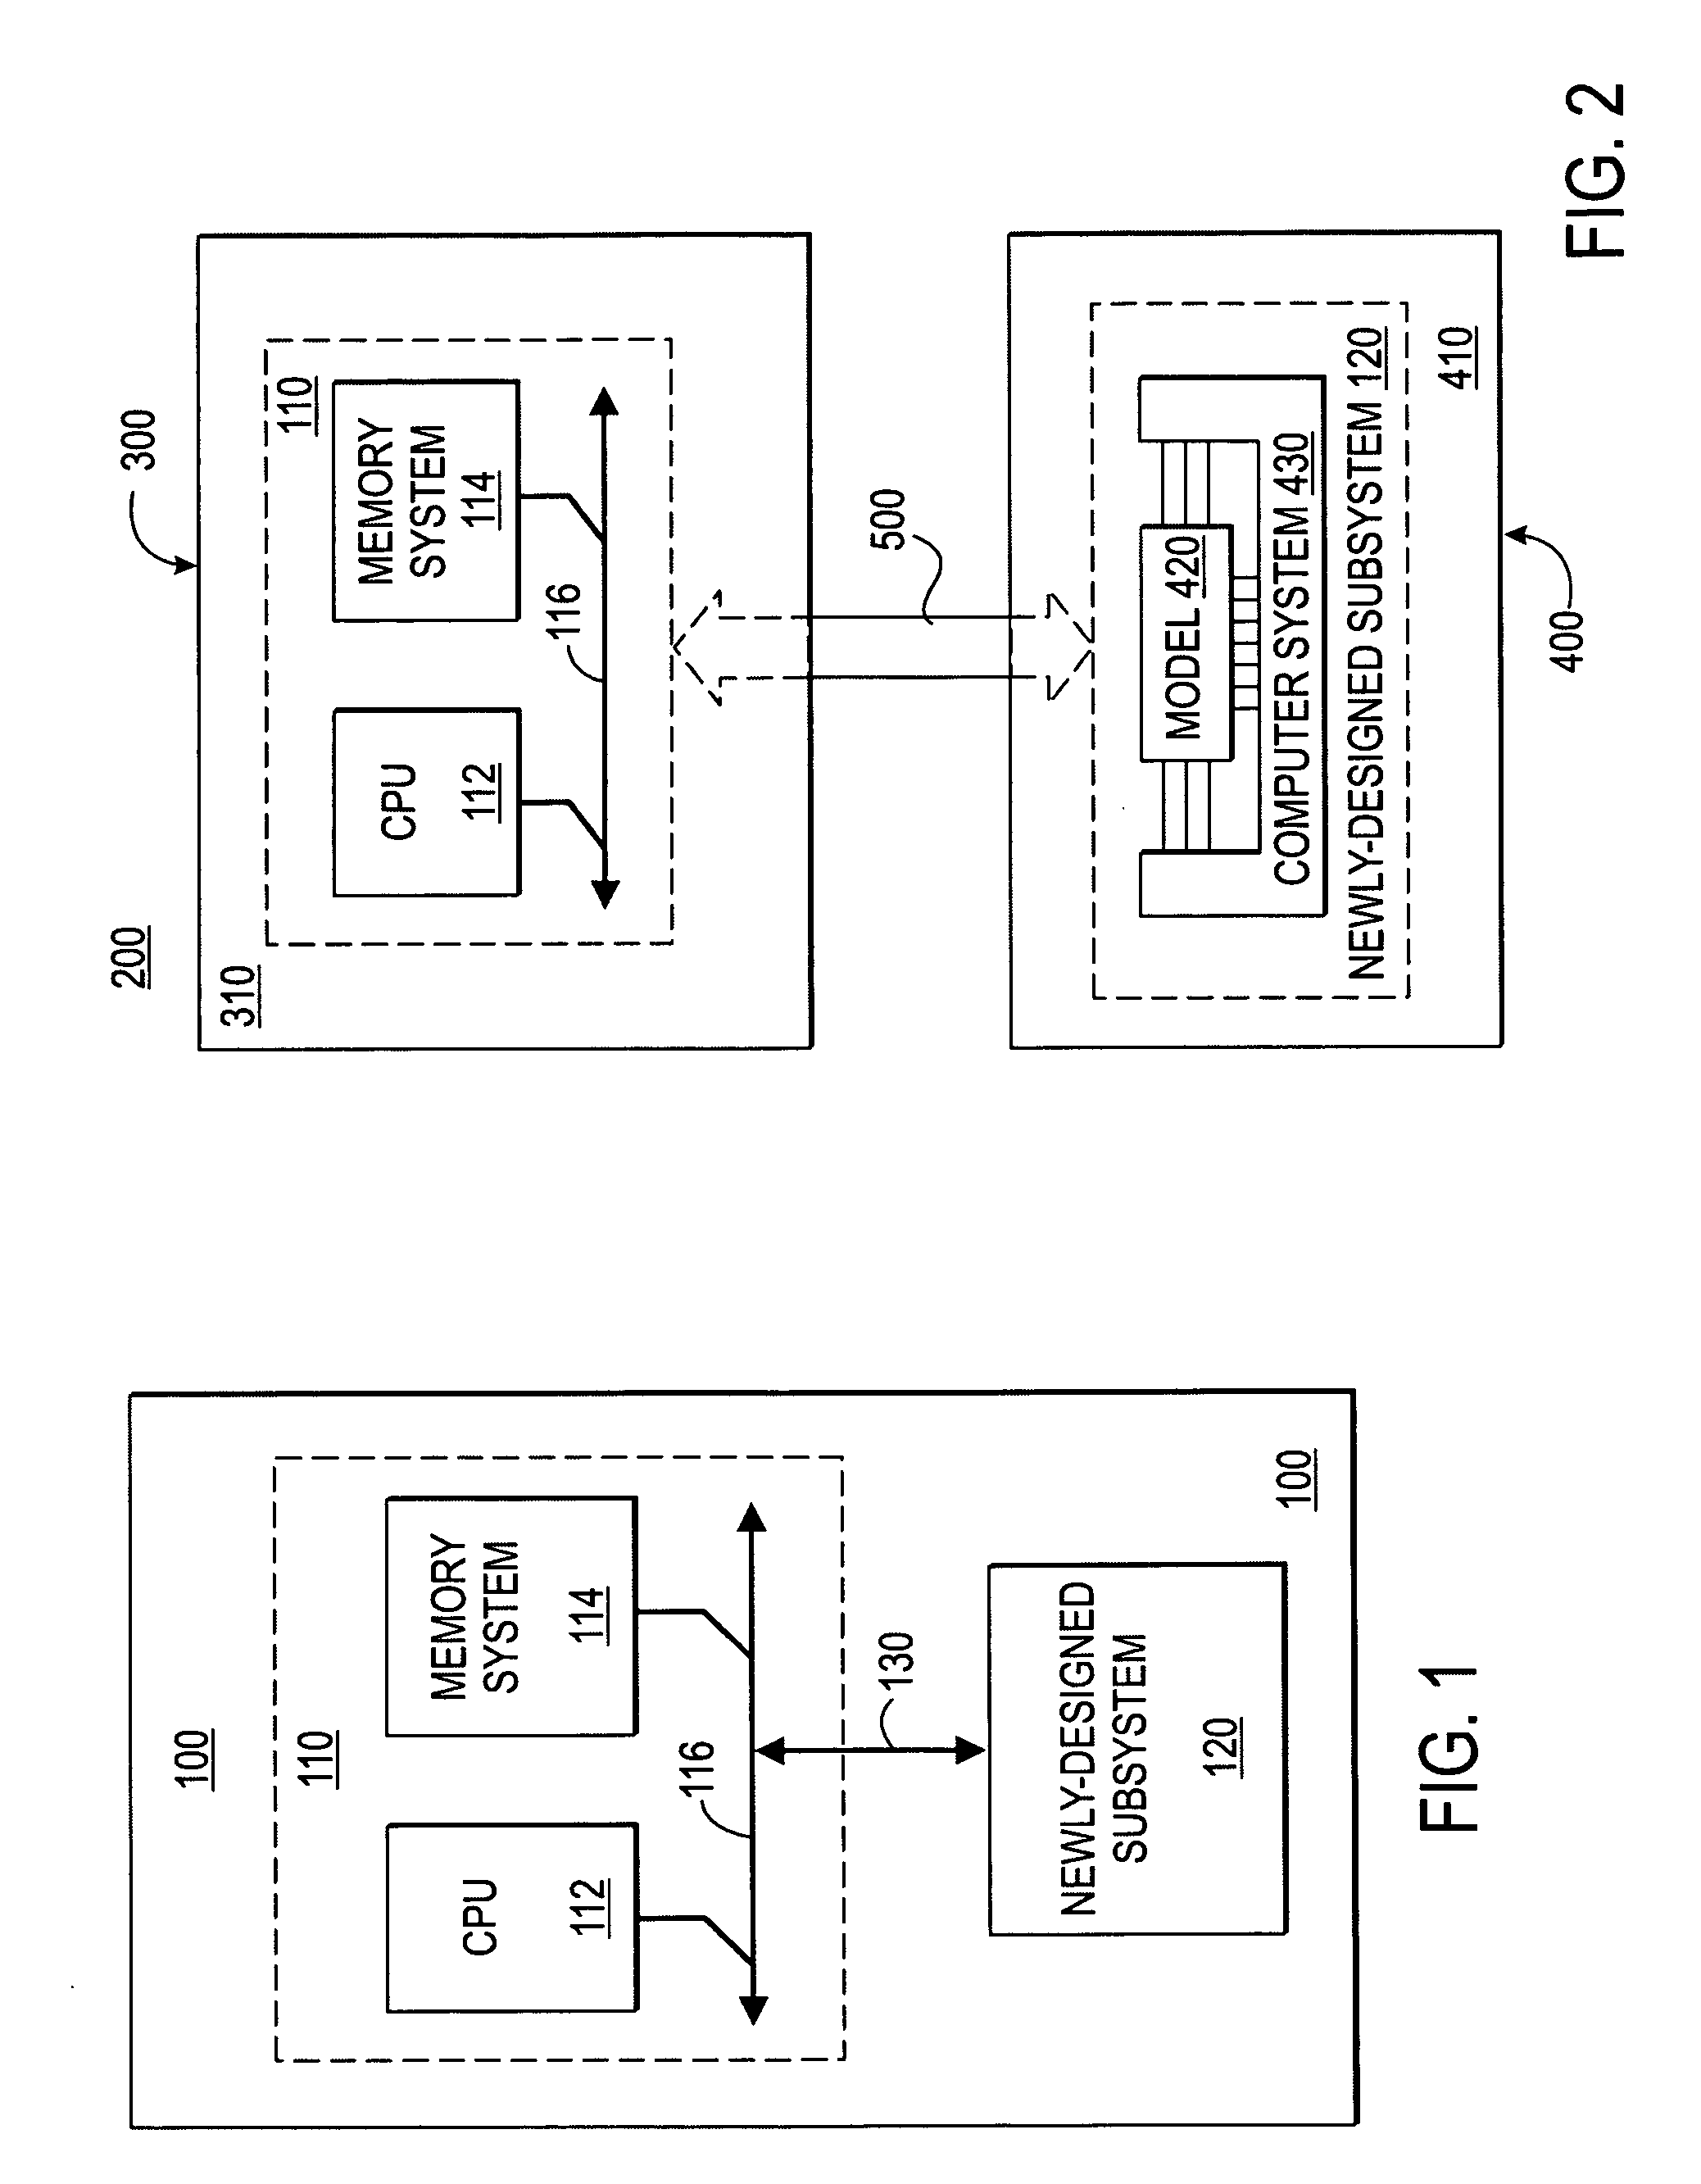 System and method for performing design verification